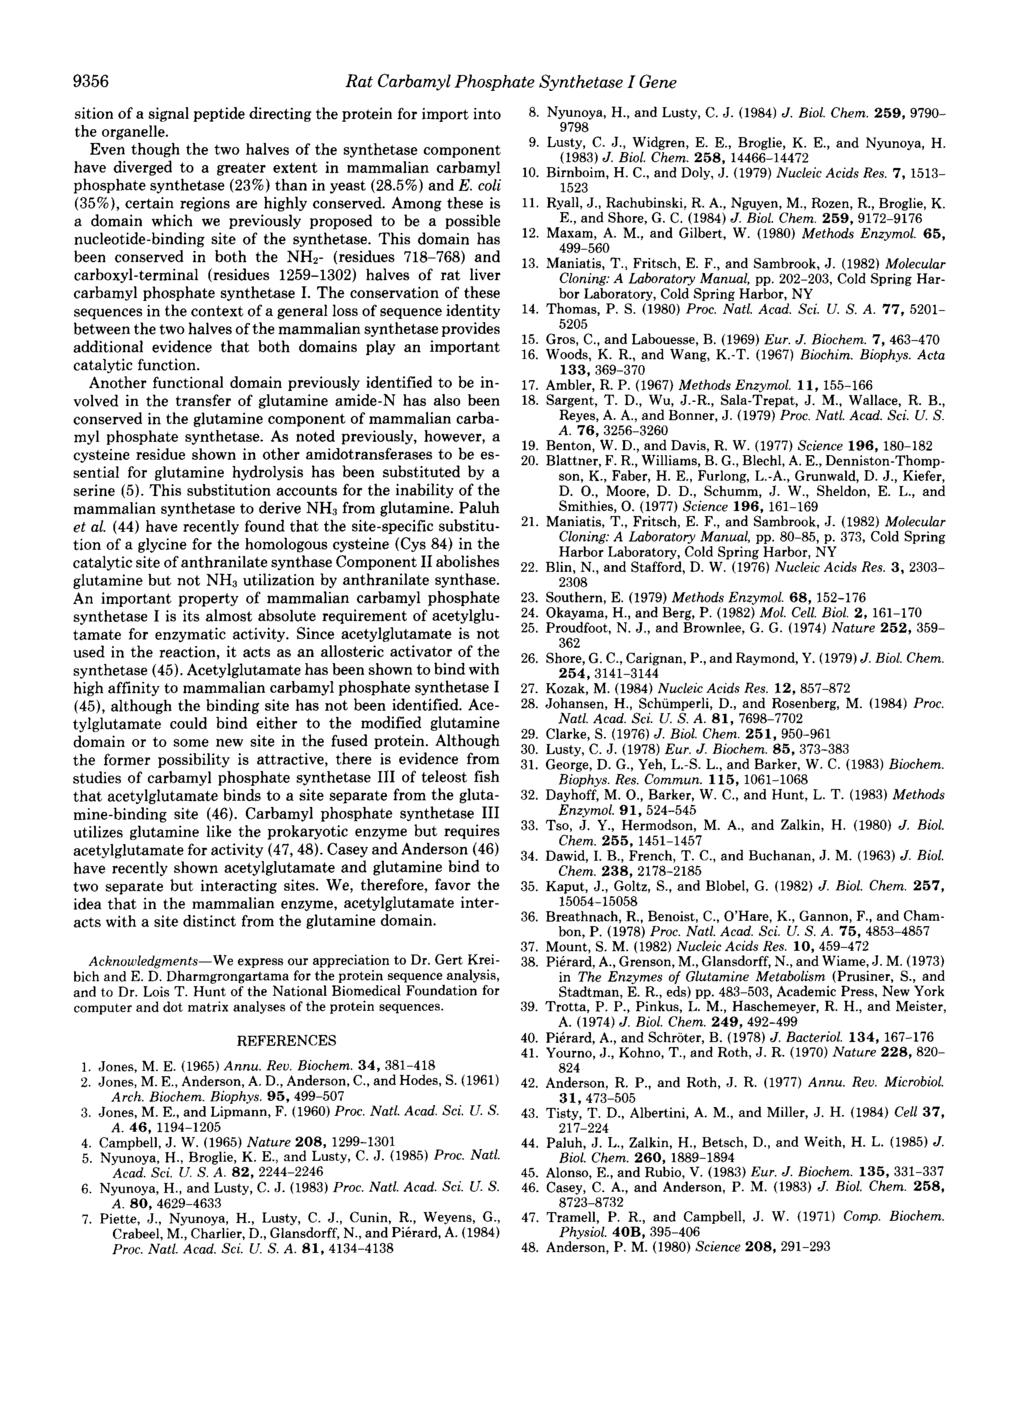 9356 Rat Carbamyl Phosphate Synthetase Gene sition of a signal peptide directing the protein for import into 8. Nyunoya, H., and Lusty, C. J. (1984) J. Biol. Chern. 259, 9790- the organelle.